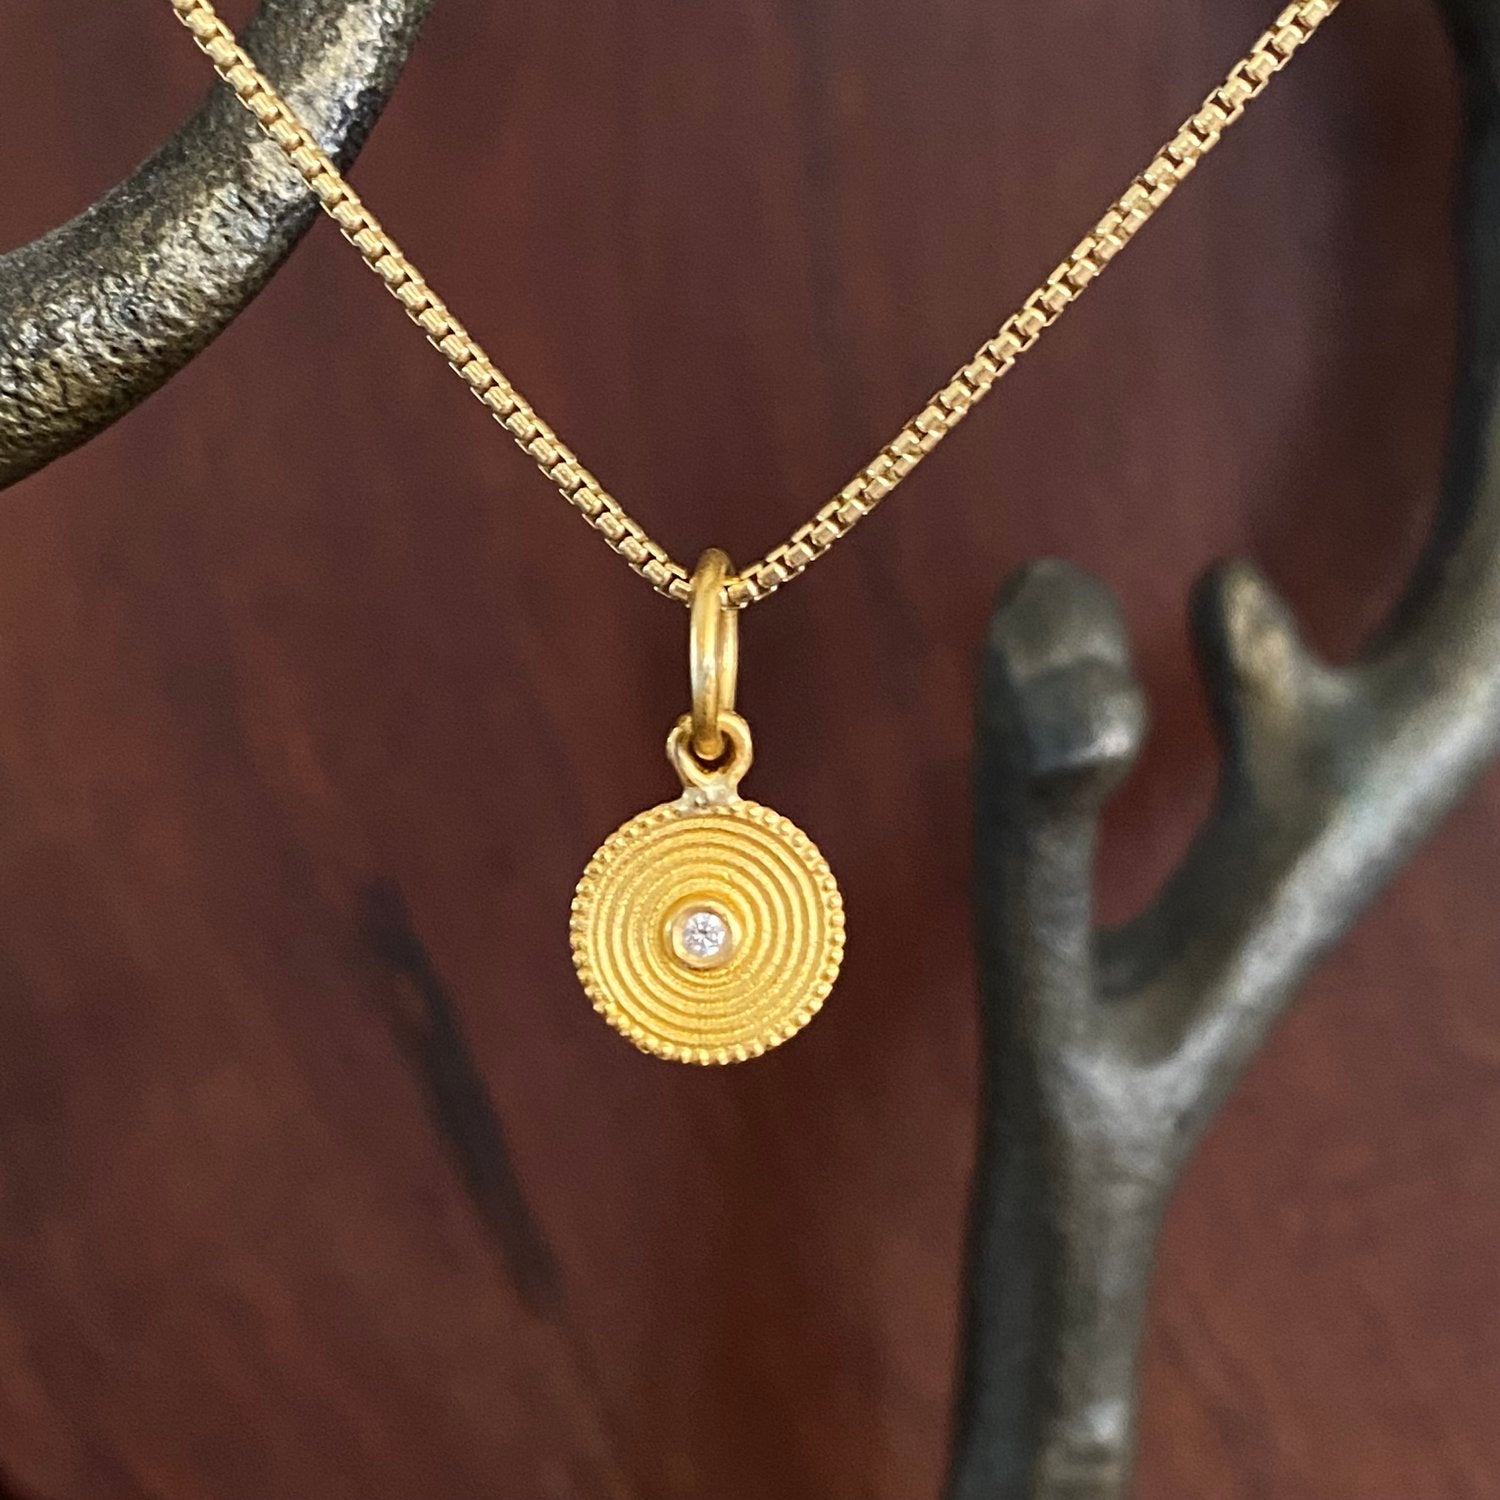 Mini Spiral, Rhythm of Life, Charm Pendant, 24K with Diamond, Handmade, by Prehistoric Works of Istanbul, Turkey
What does the spiral symbol mean? The spiral is one of the oldest symbols in the world. It appears in most ancient cultures across the